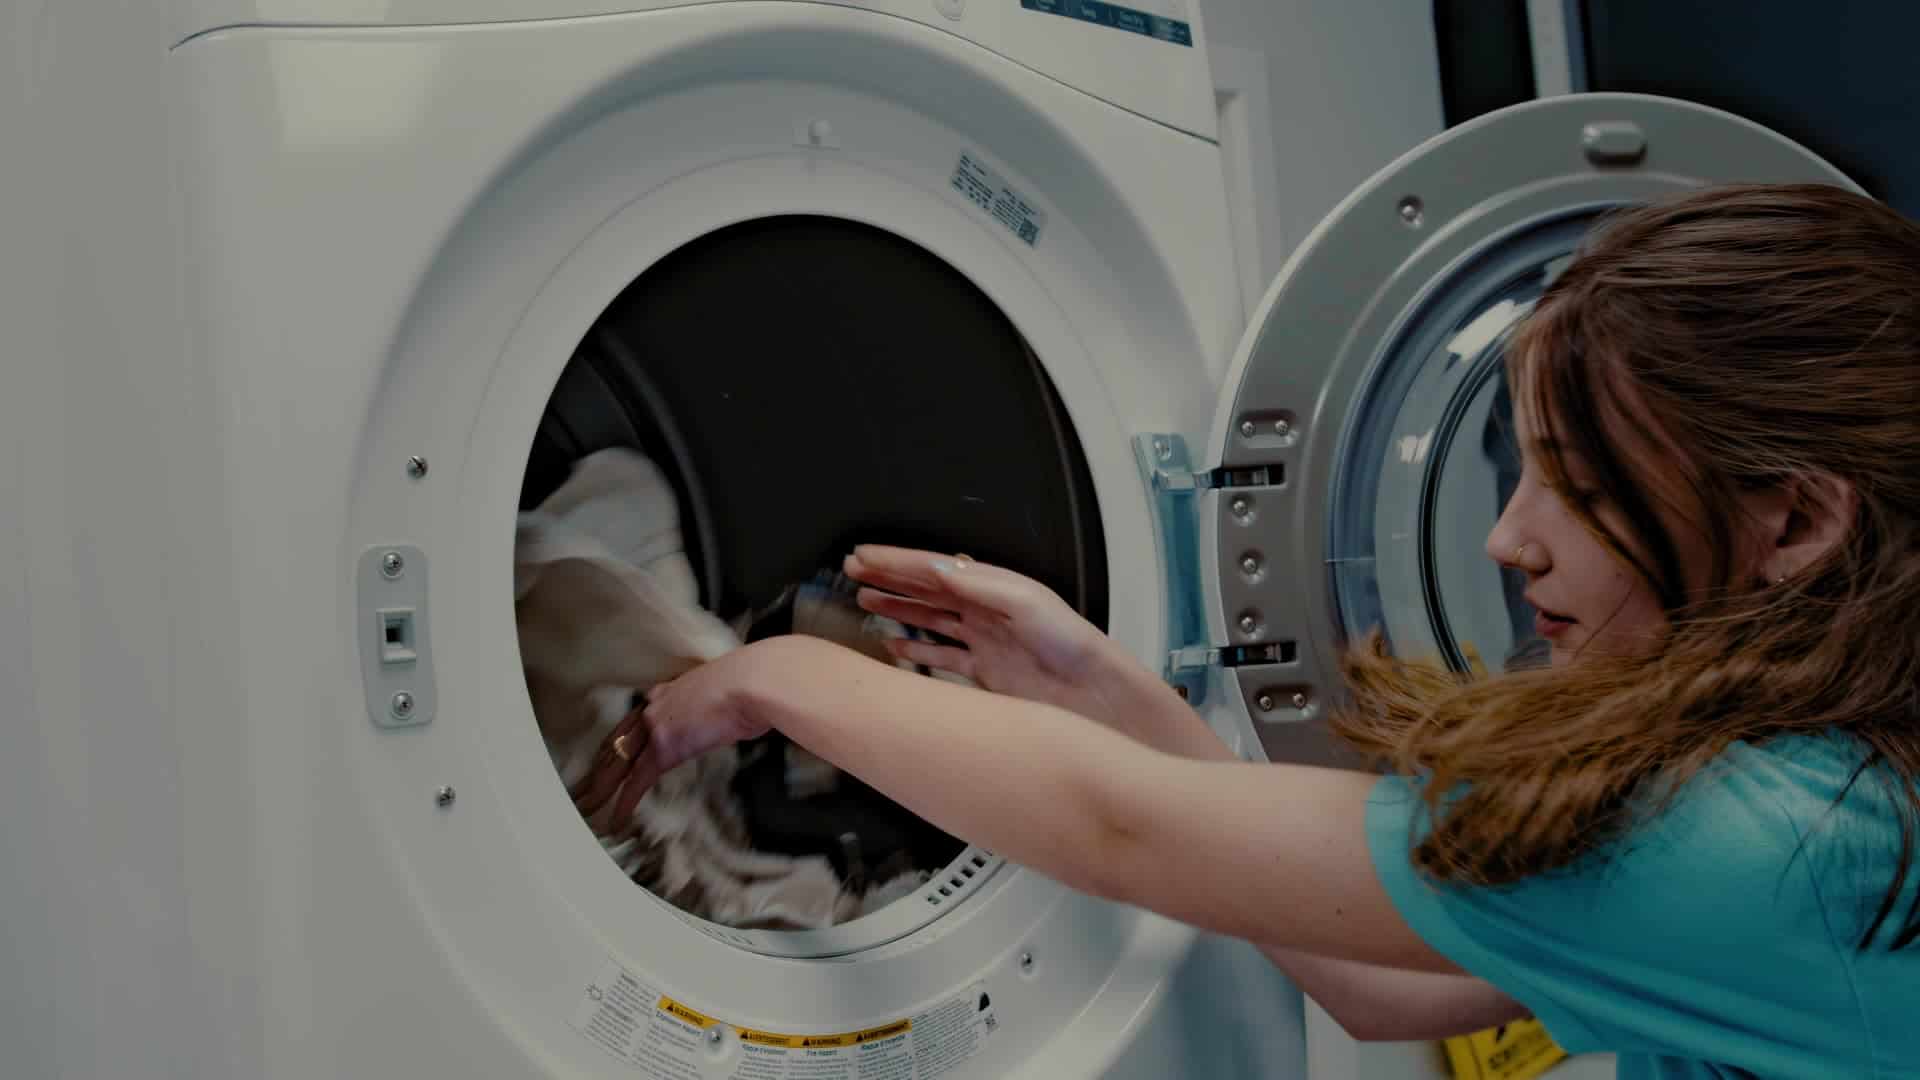 Woman throws towels in commercial dryer at dog grooming business